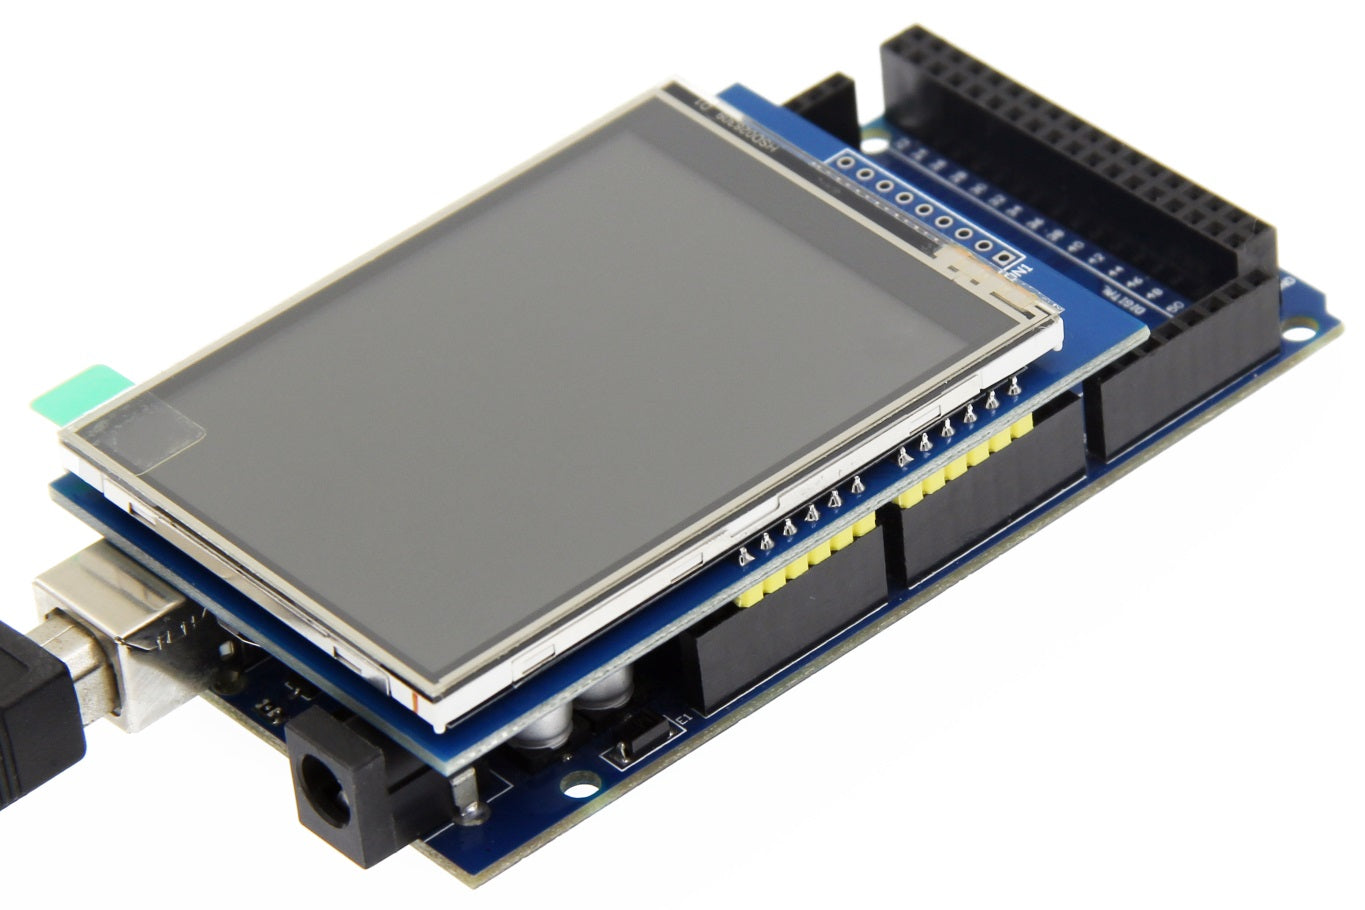 2.8 inch Full Color TFT Touchscreen display (ILI9341) for Arduino UNO and MEGA